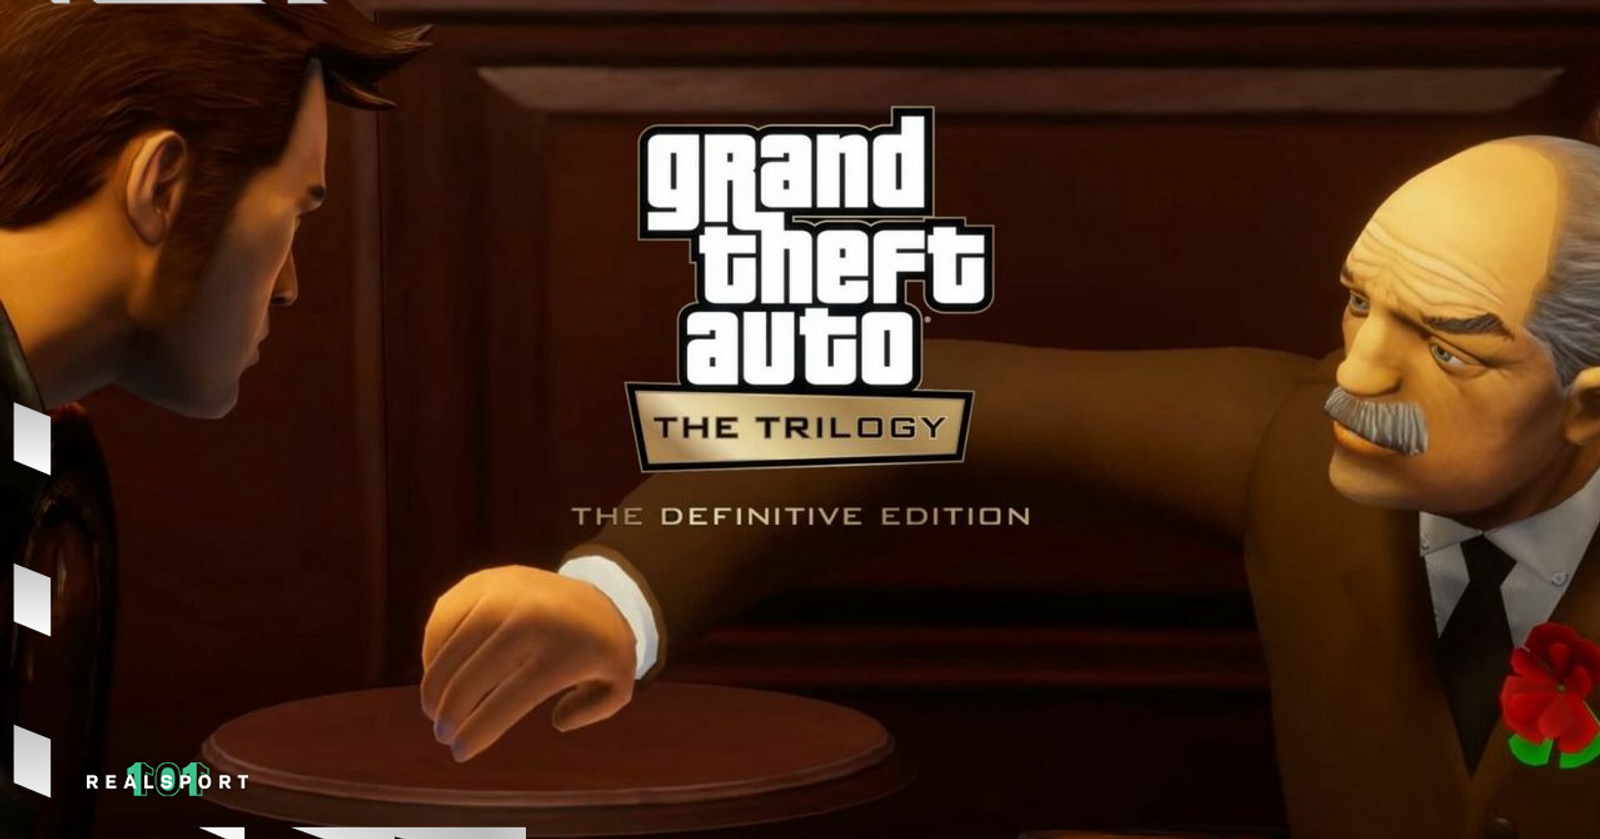 Here are Grand Theft Auto: The Trilogy - Definitive Edition's PC